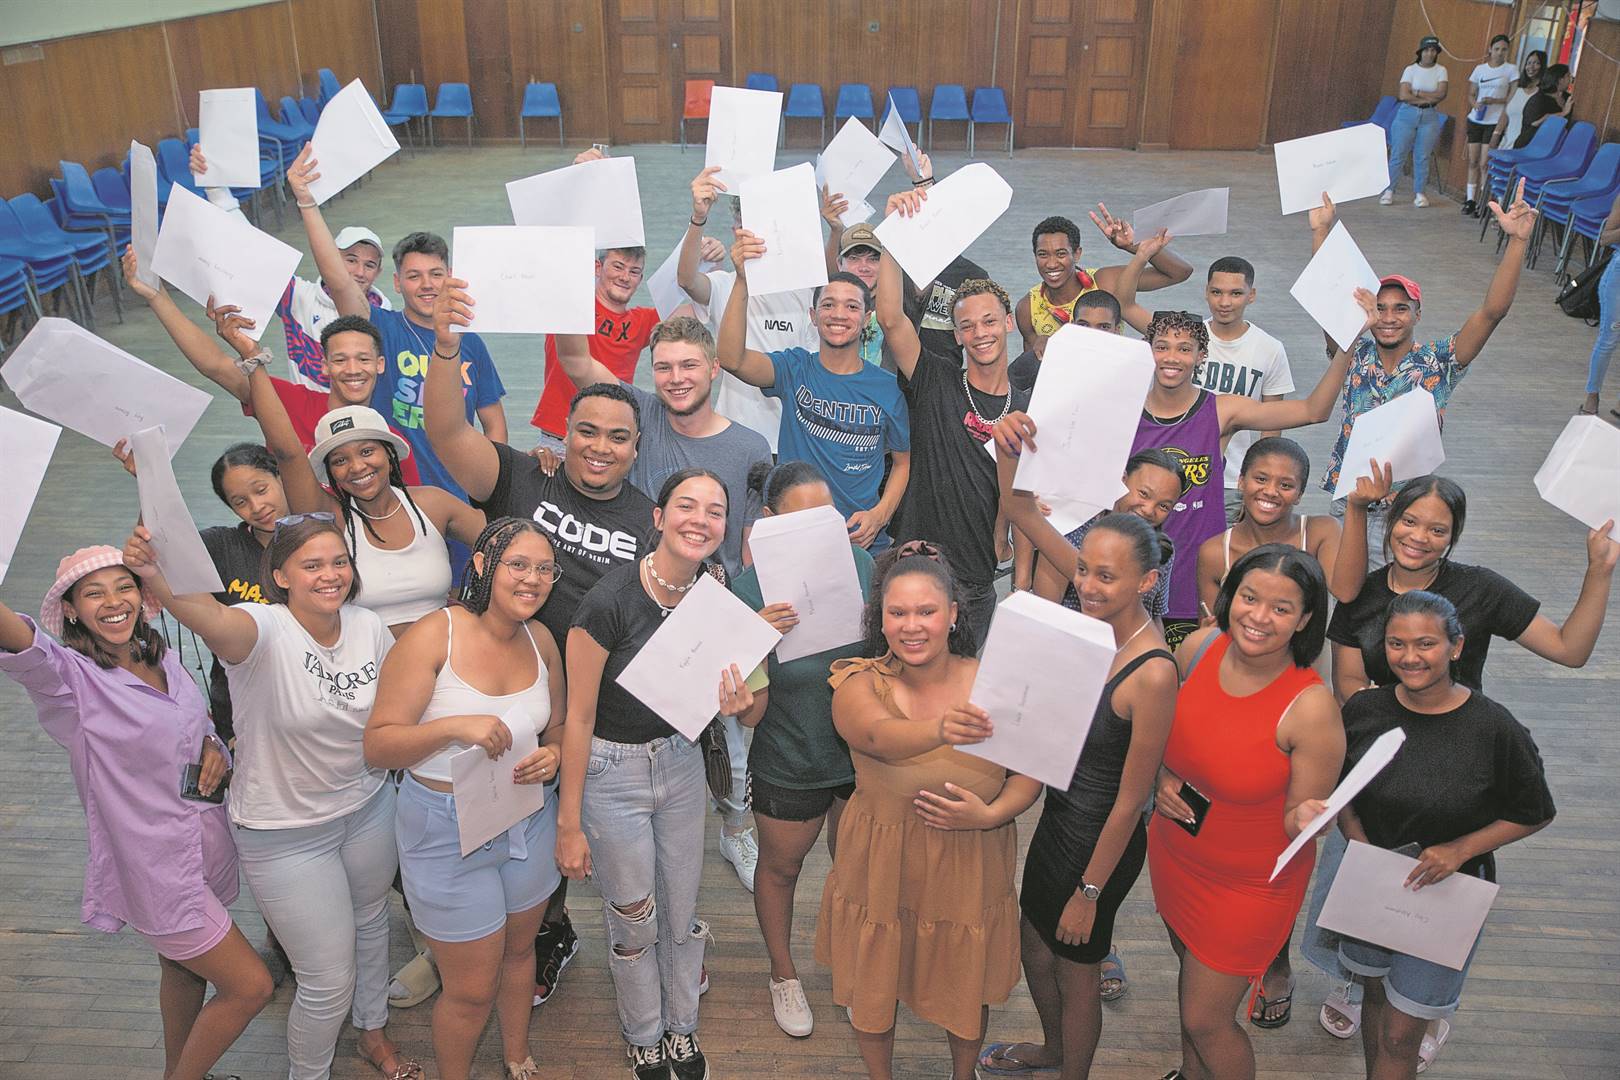 Matric students celebrate their results. All parents should have the choice on where to educate their children